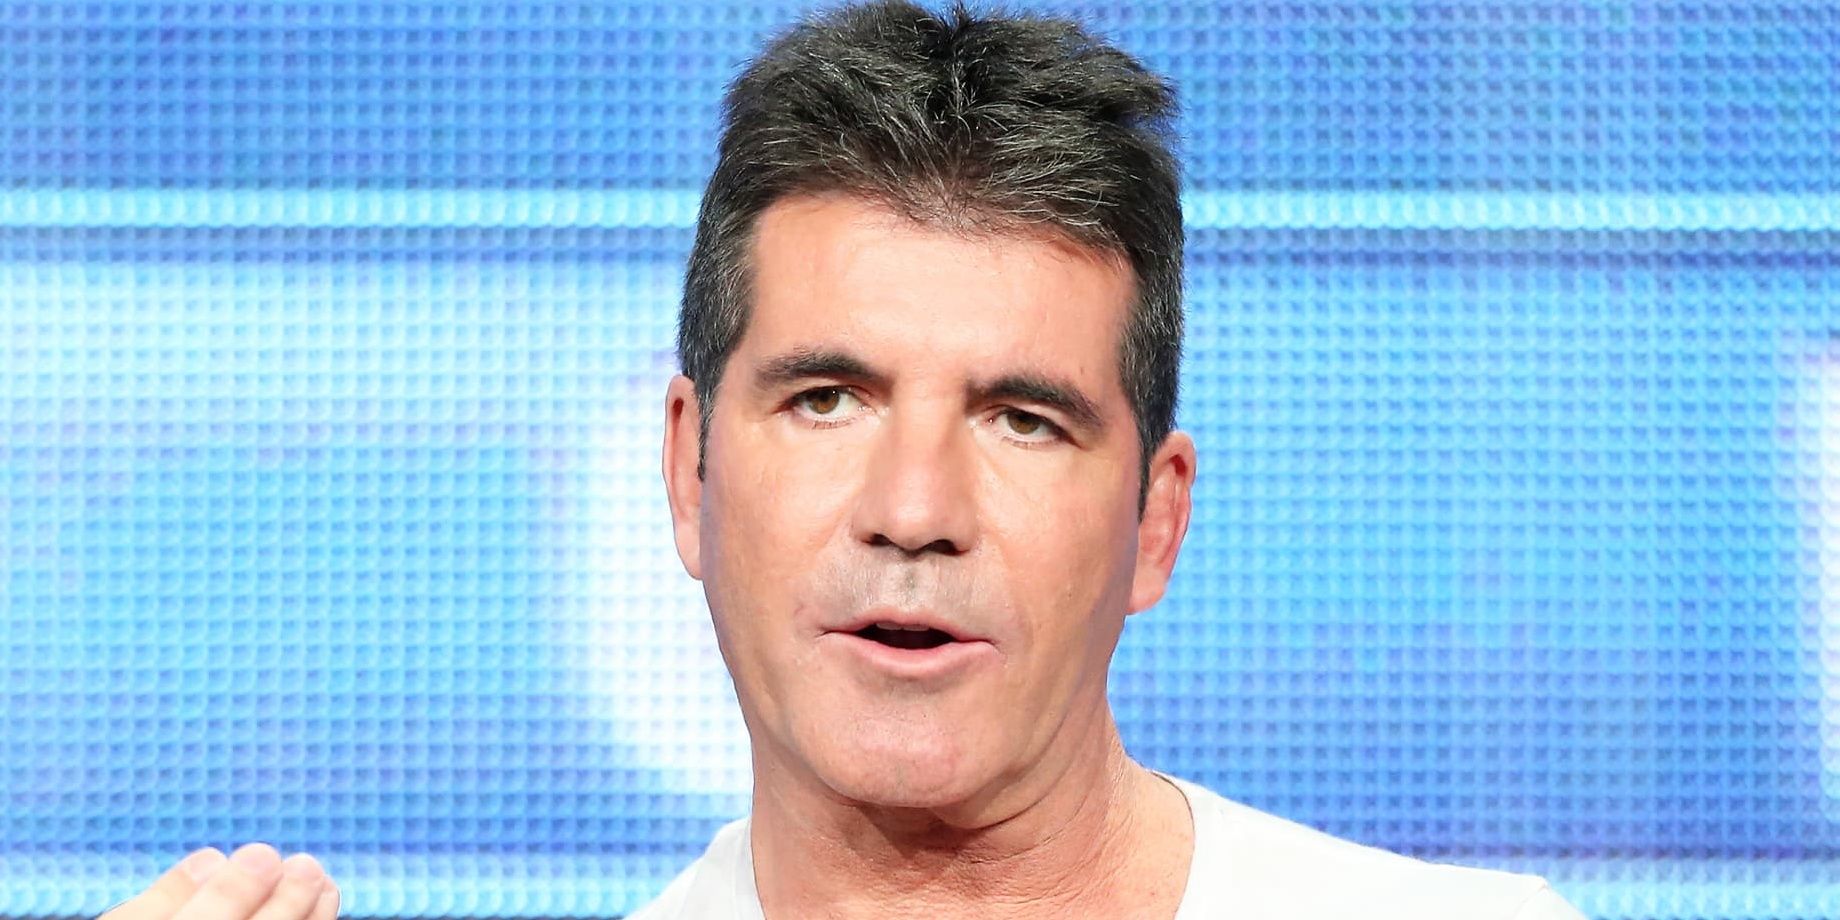 Simon Cowell in a white tee talking on Britain's Got Talent